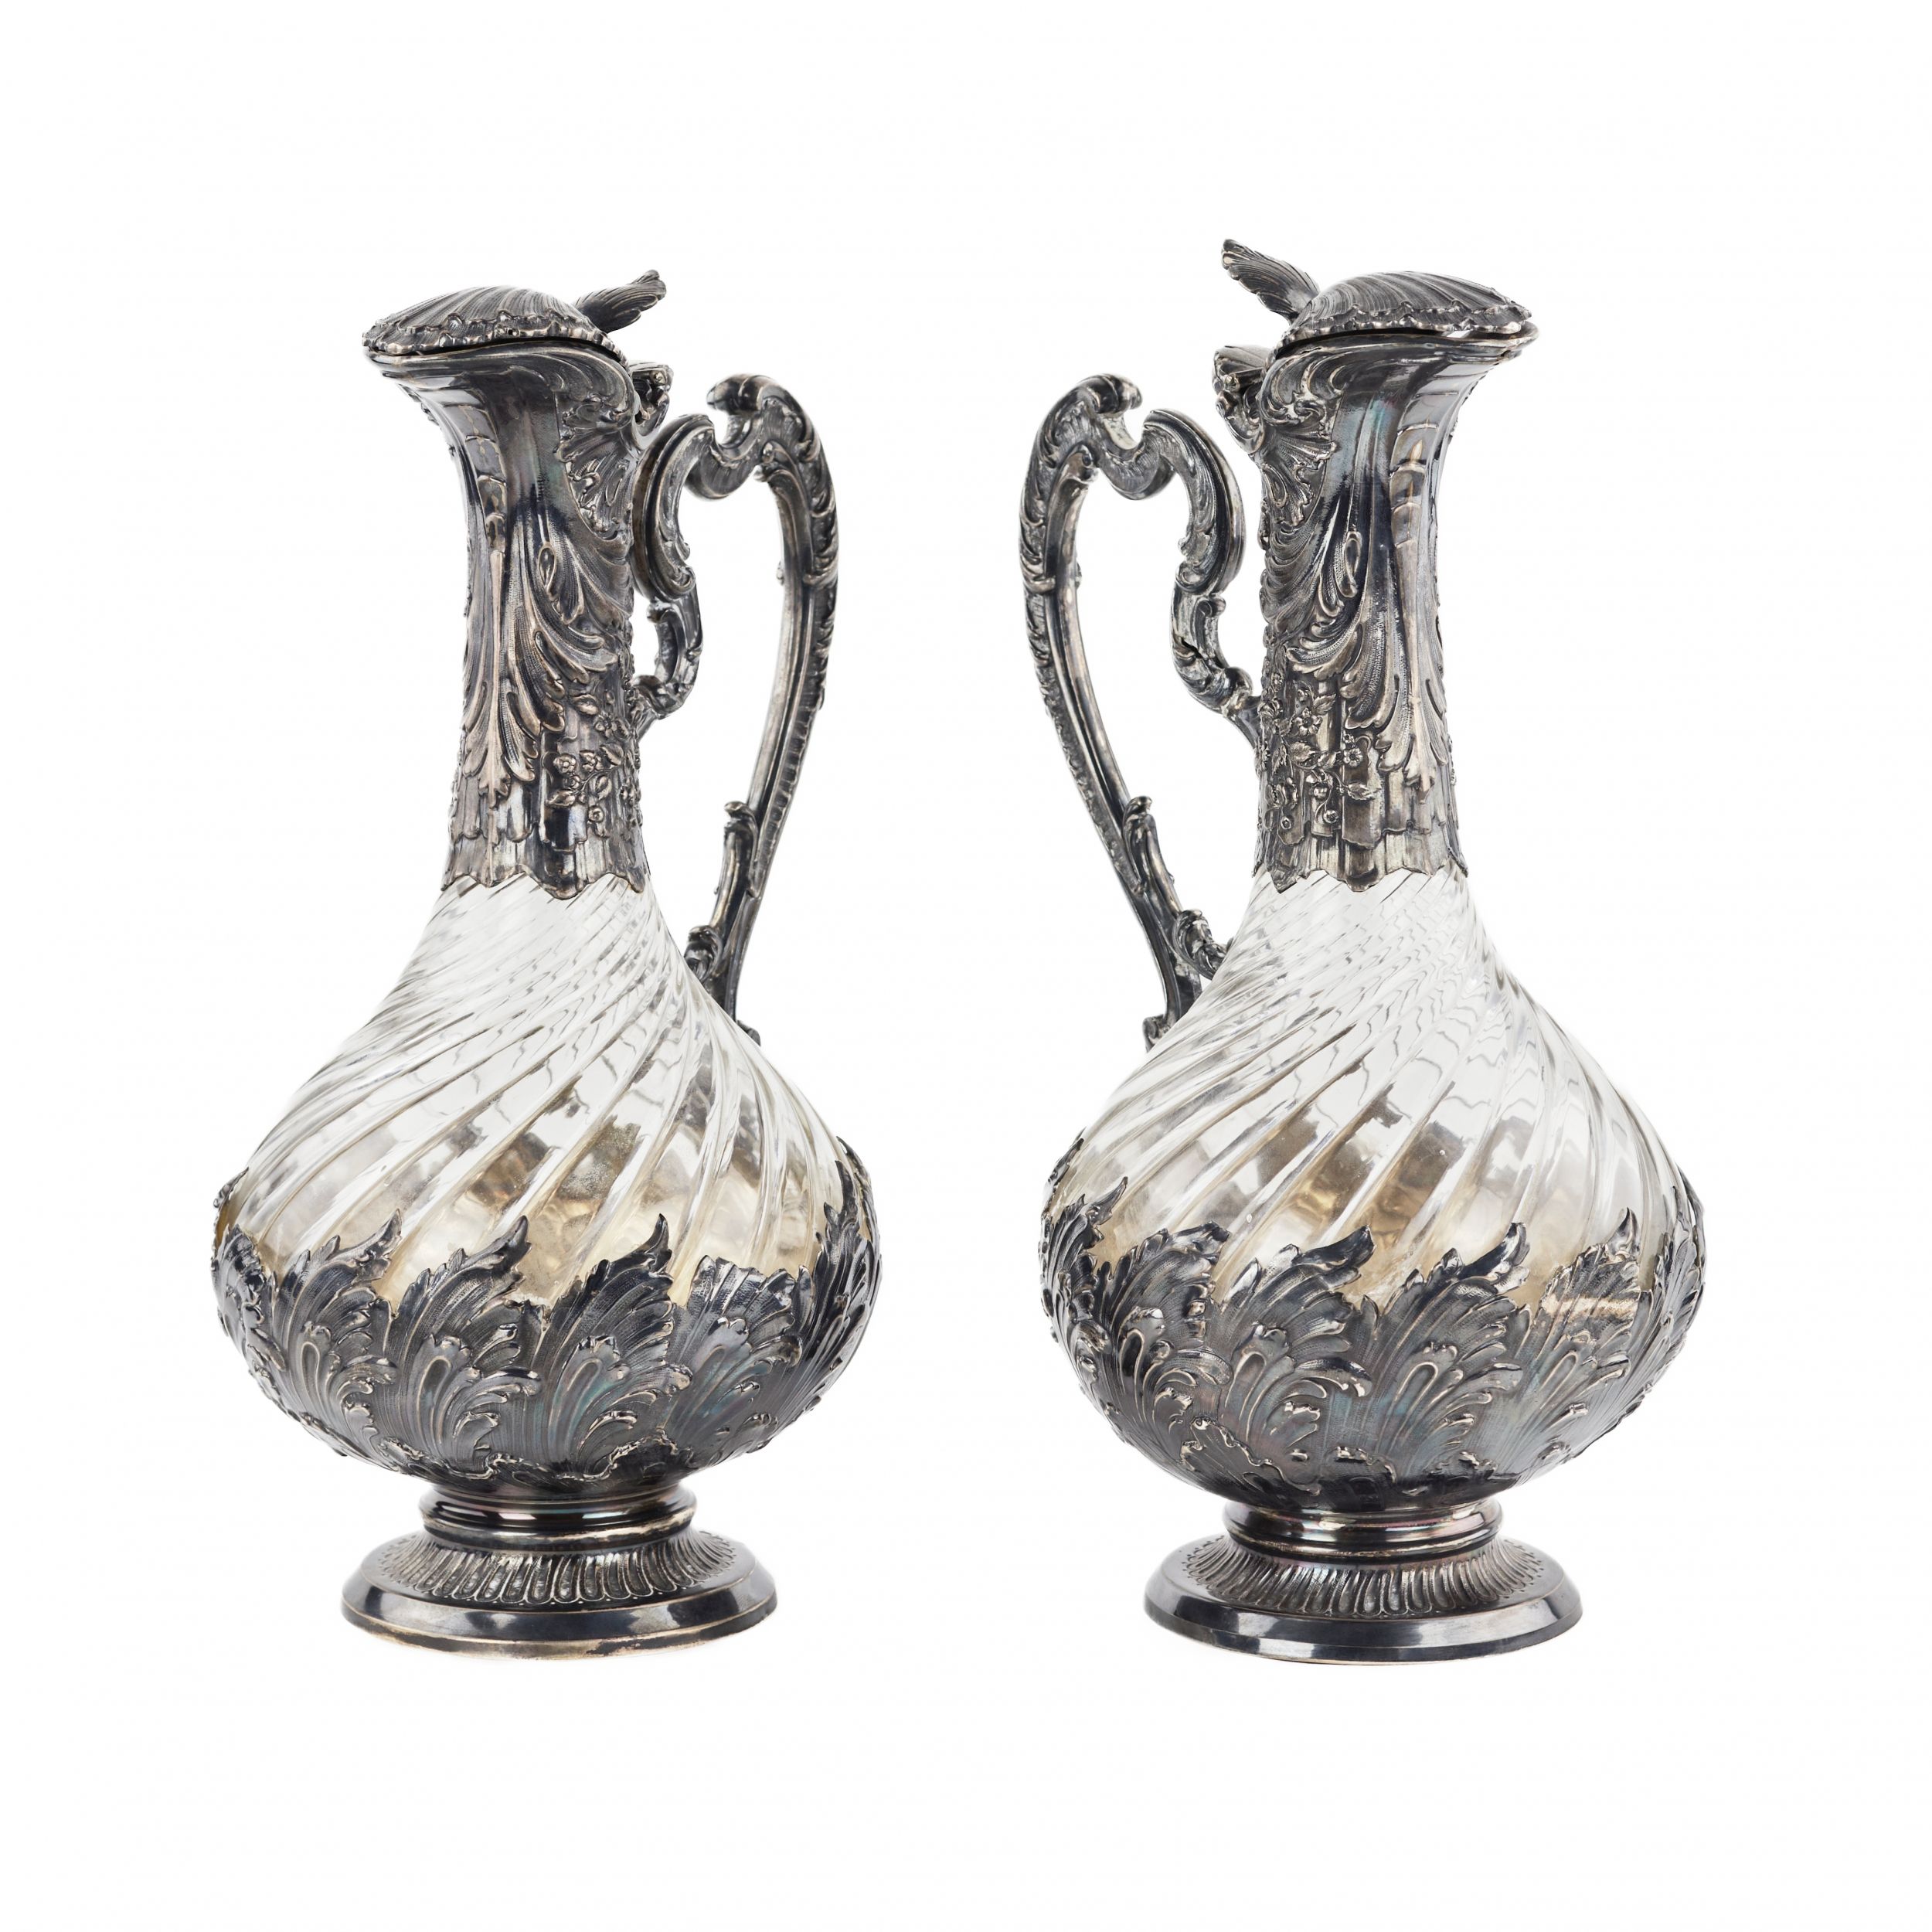 Frangiere & Laroche. Pair of French wine jugs. Glass in silver. 1880s. - Image 3 of 9